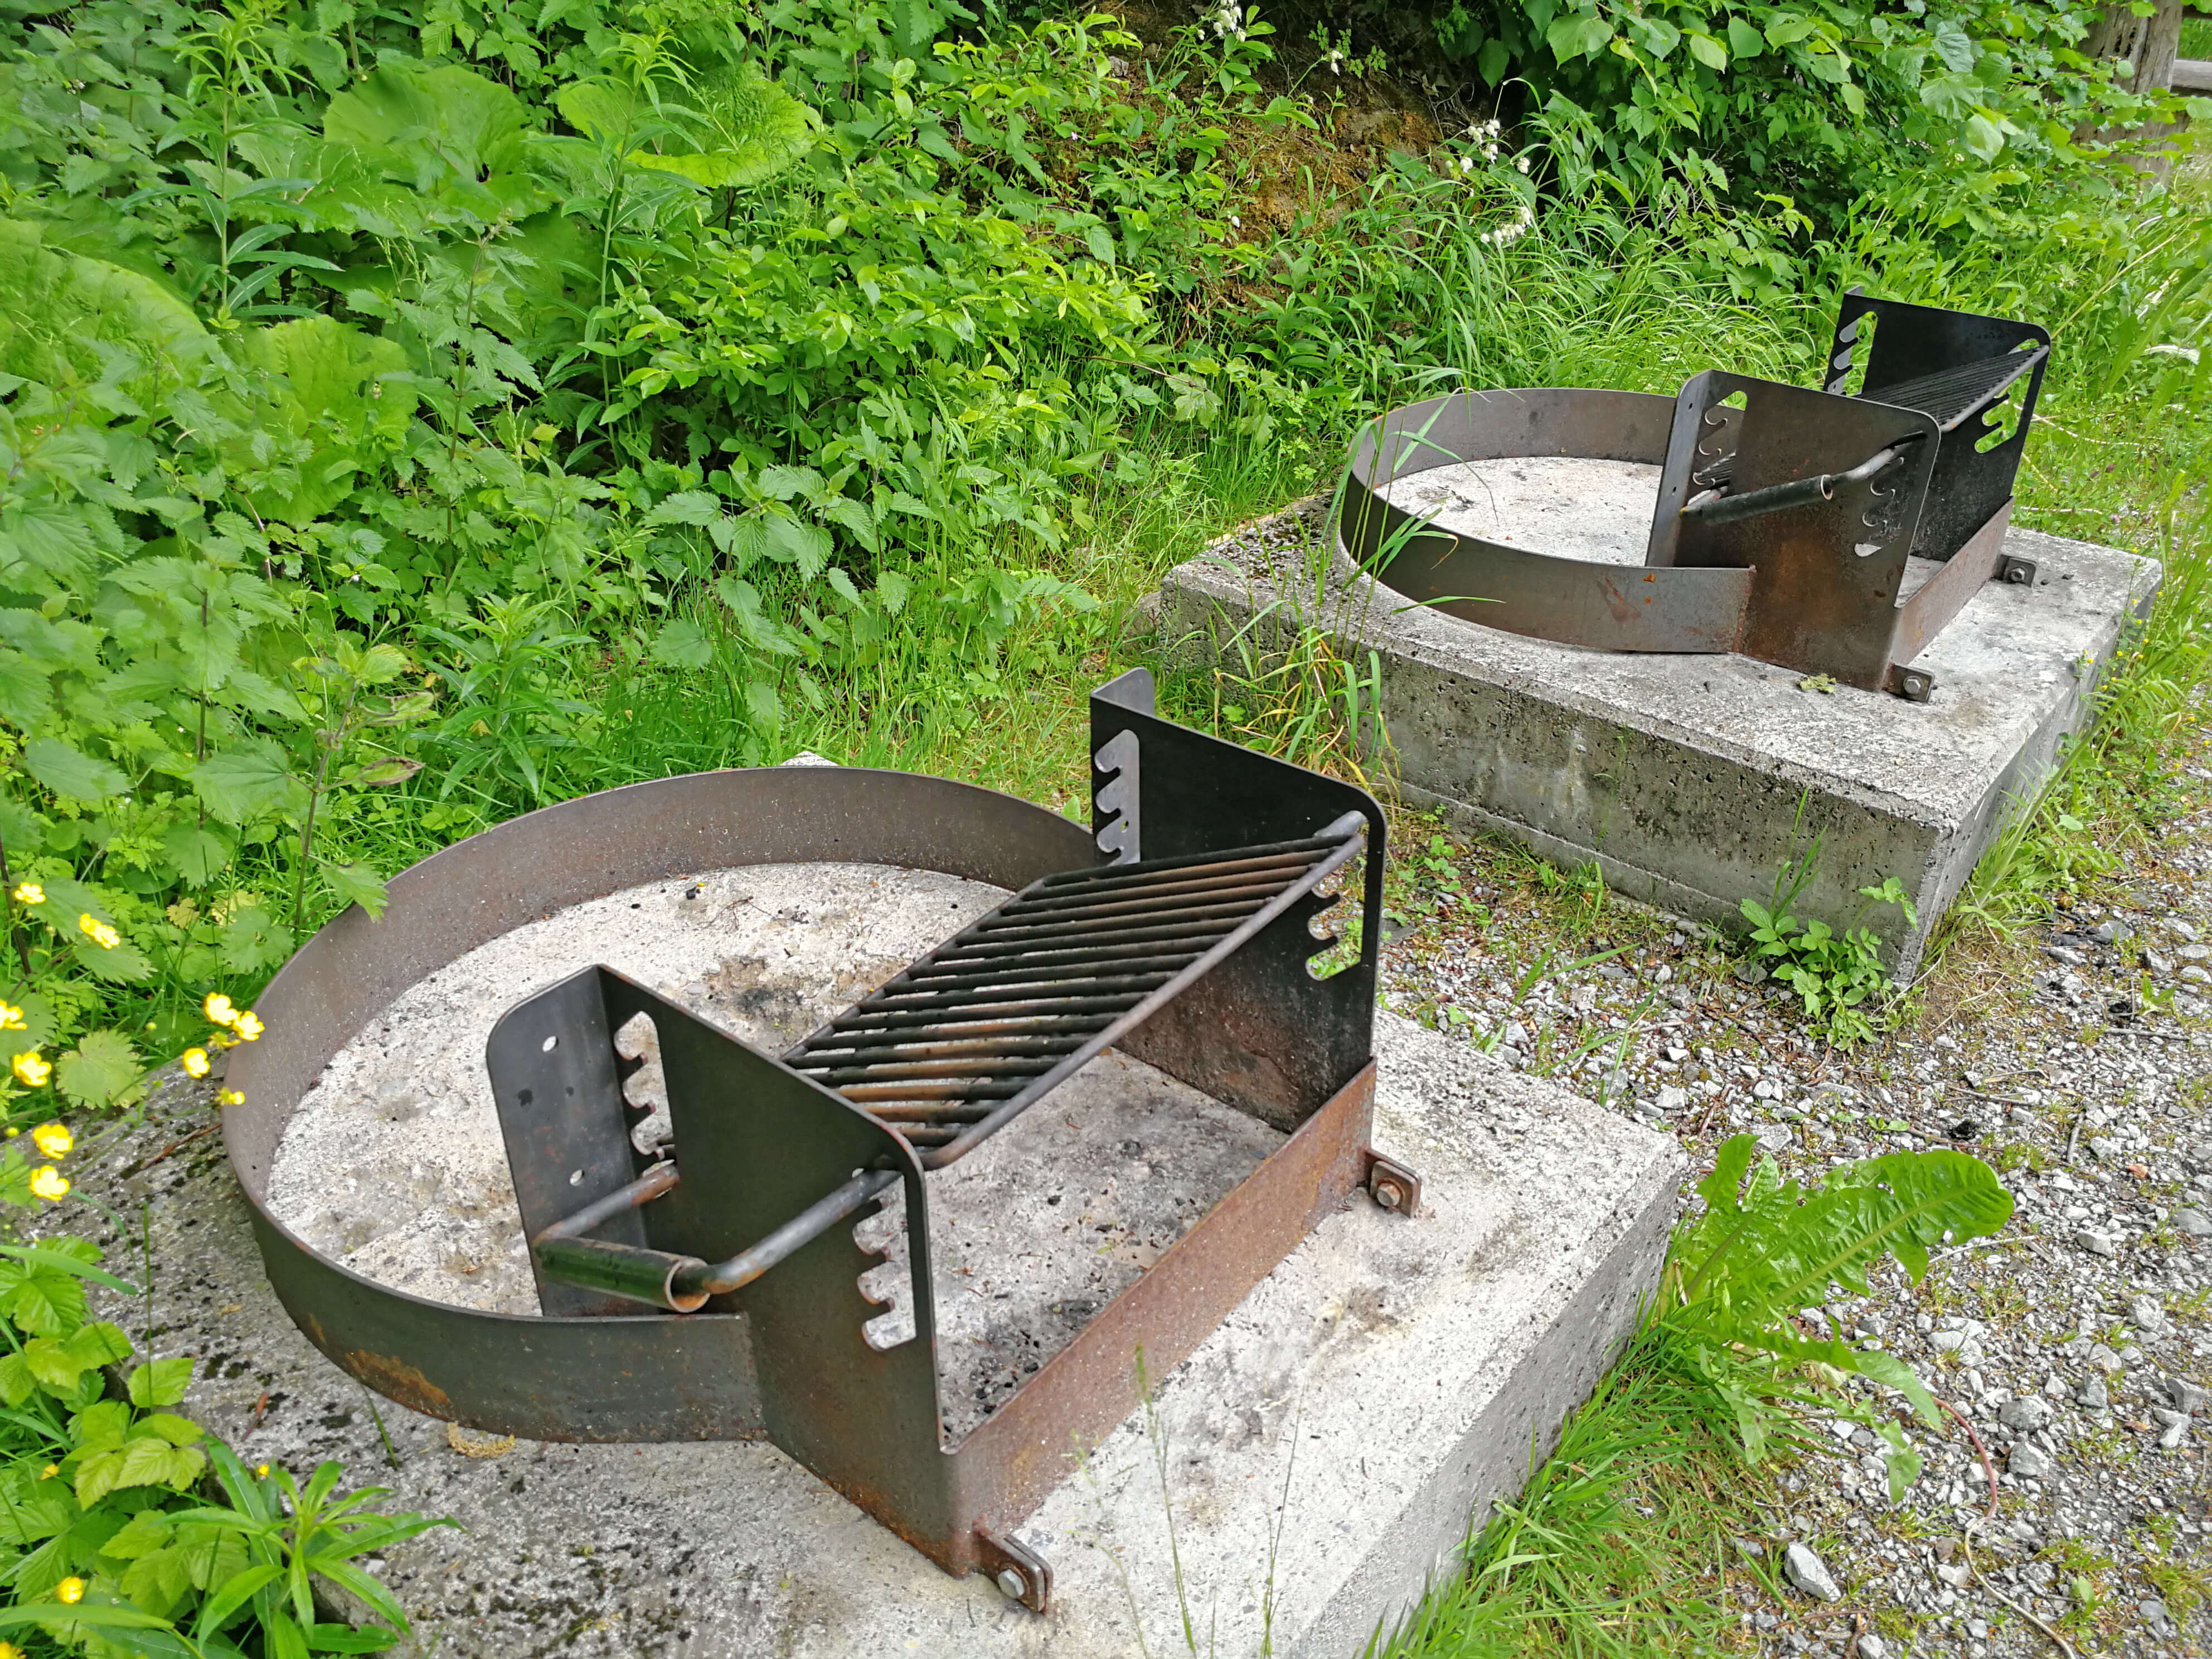 Several fireplaces for barbecuing